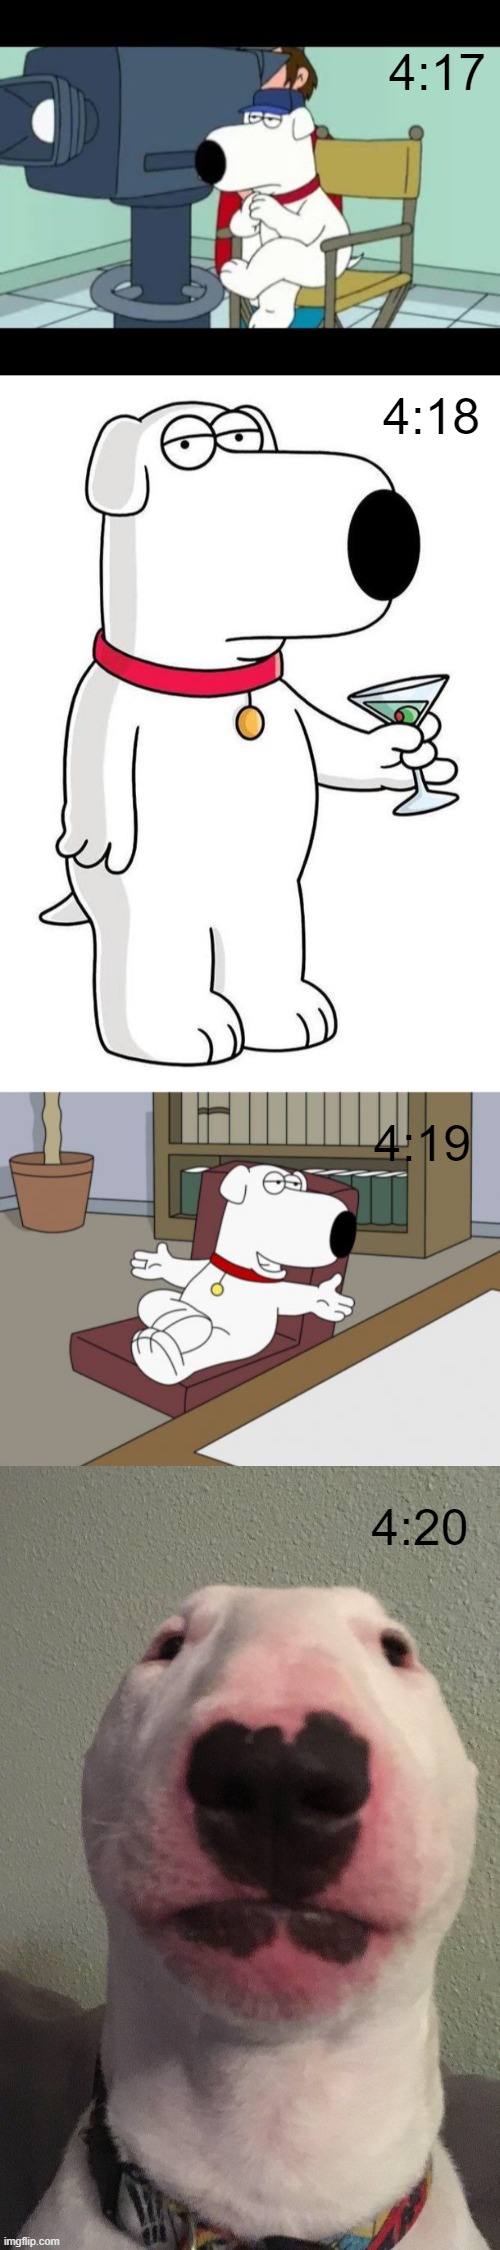 4:20 | 4:17; 4:18; 4:19; 4:20 | image tagged in brian director,sarcastic brian griffin,brian griffin,walter,420,marijuana | made w/ Imgflip meme maker